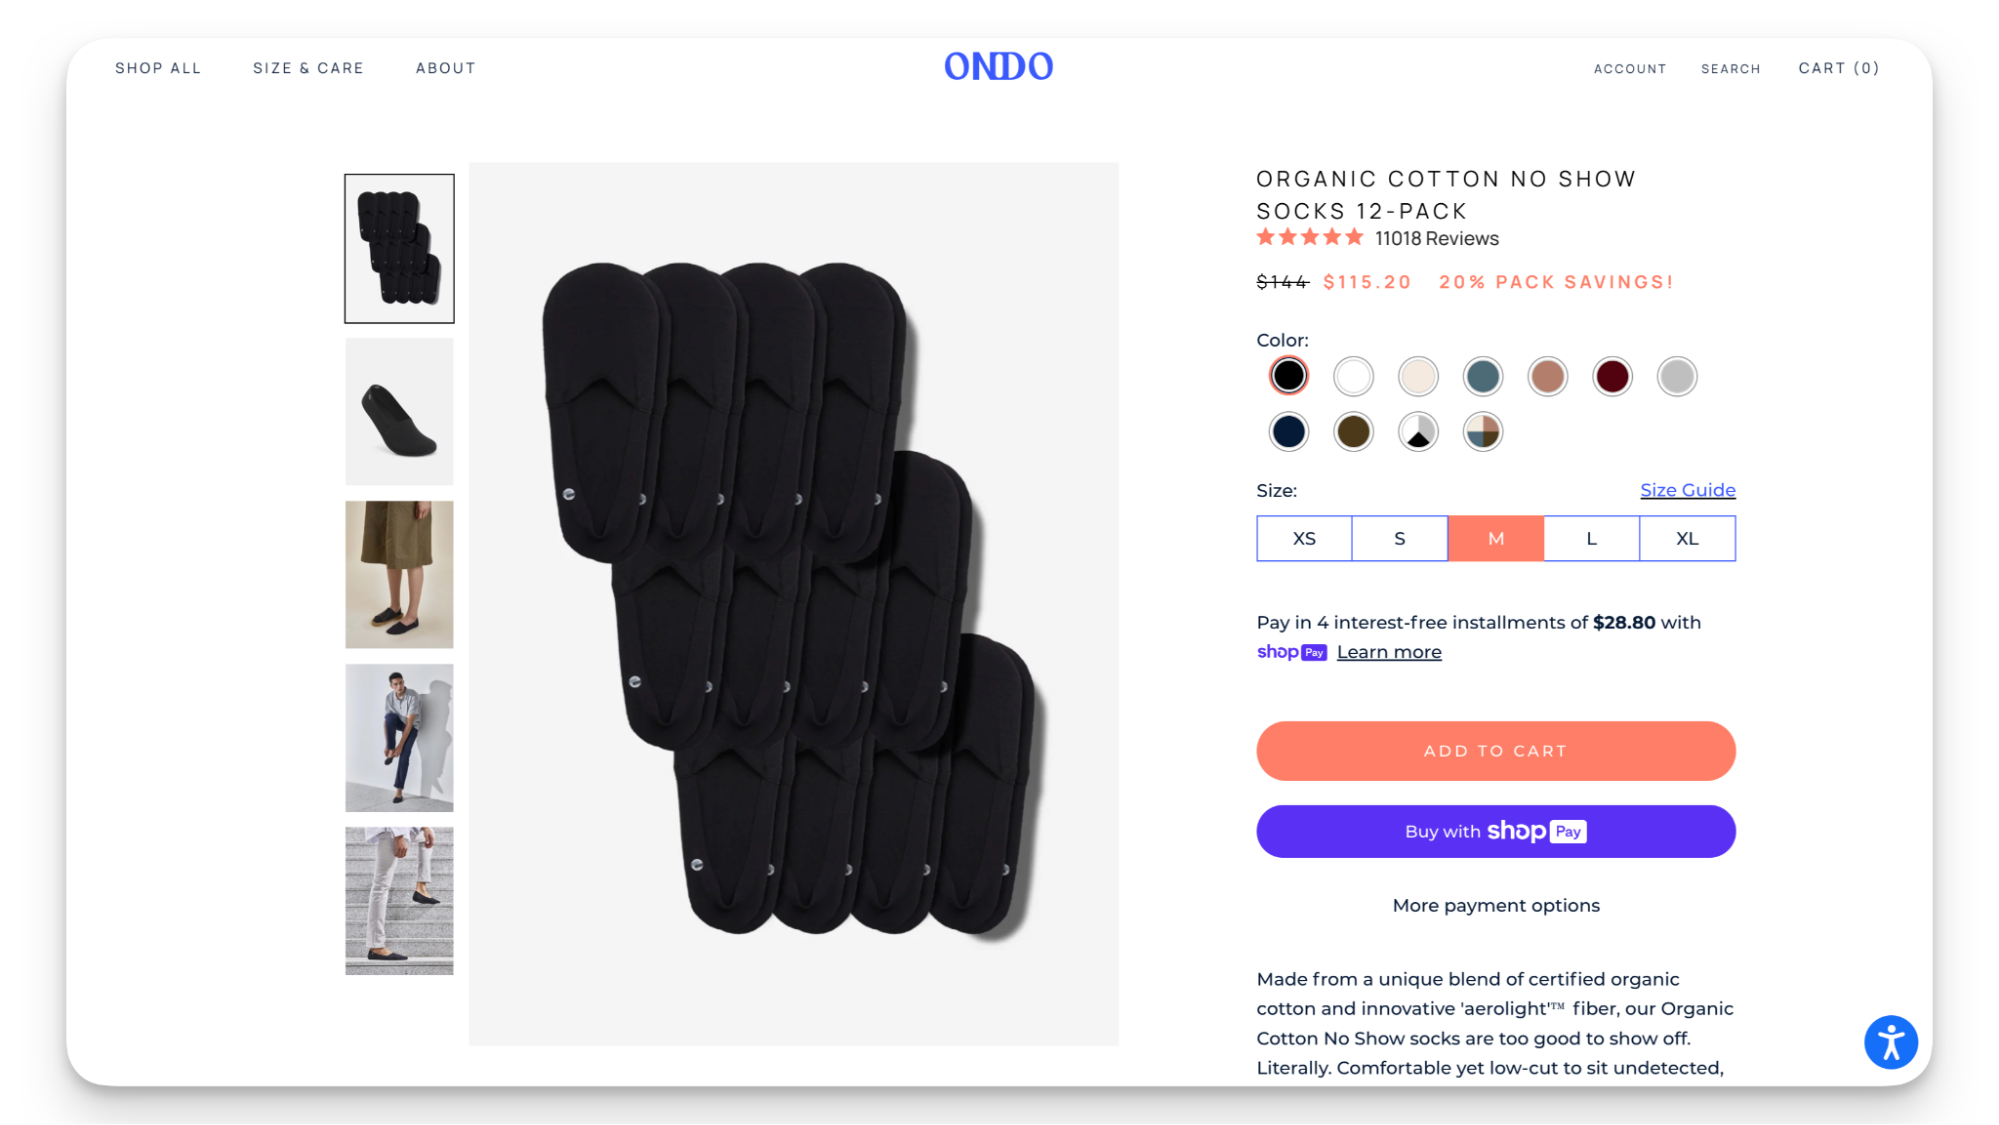 Product page from Ondo offering BNPL options through Shop Pay Installments